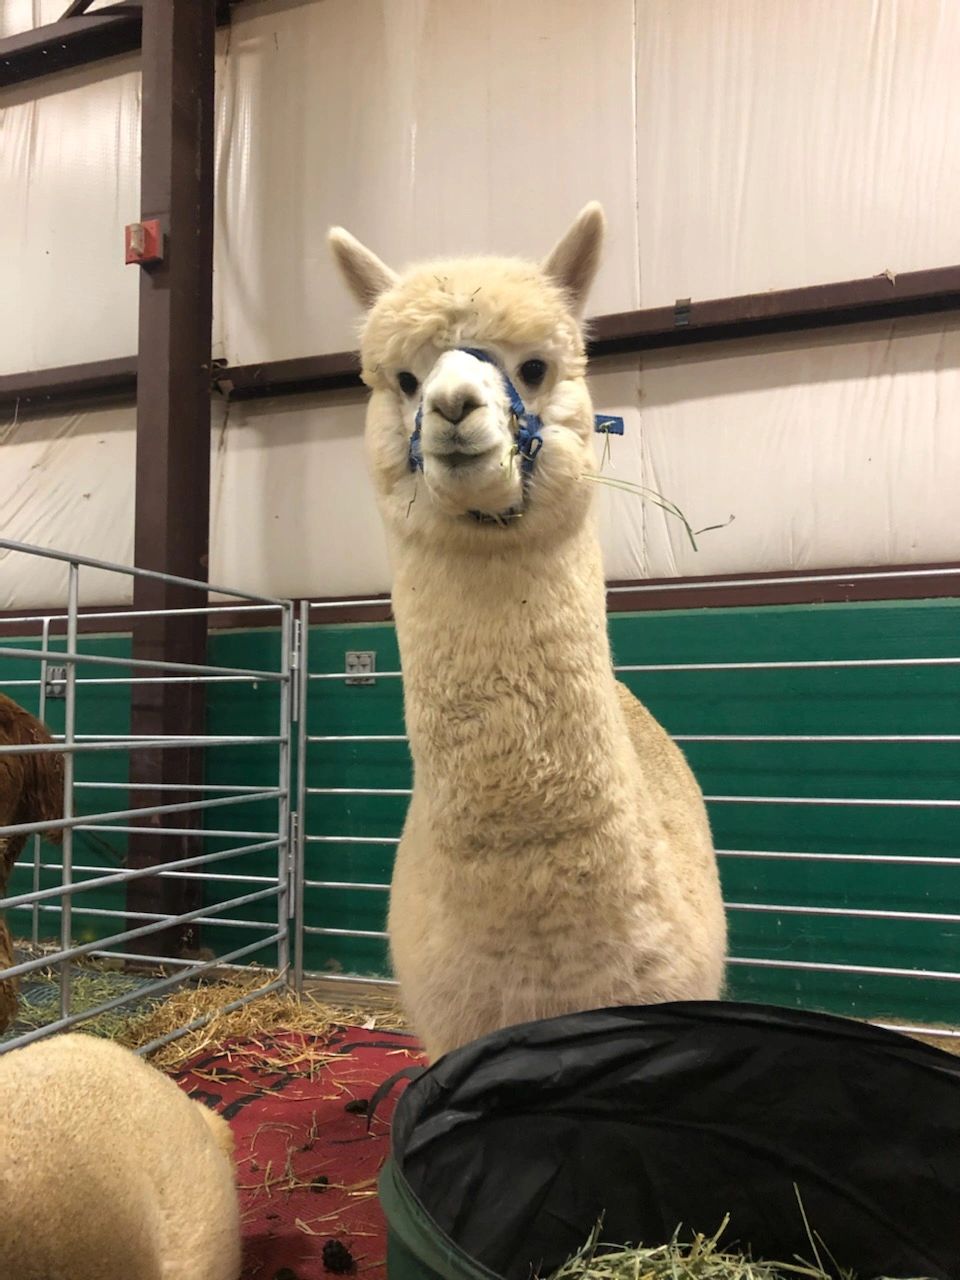 A blue band tied around the white alpaca mouth